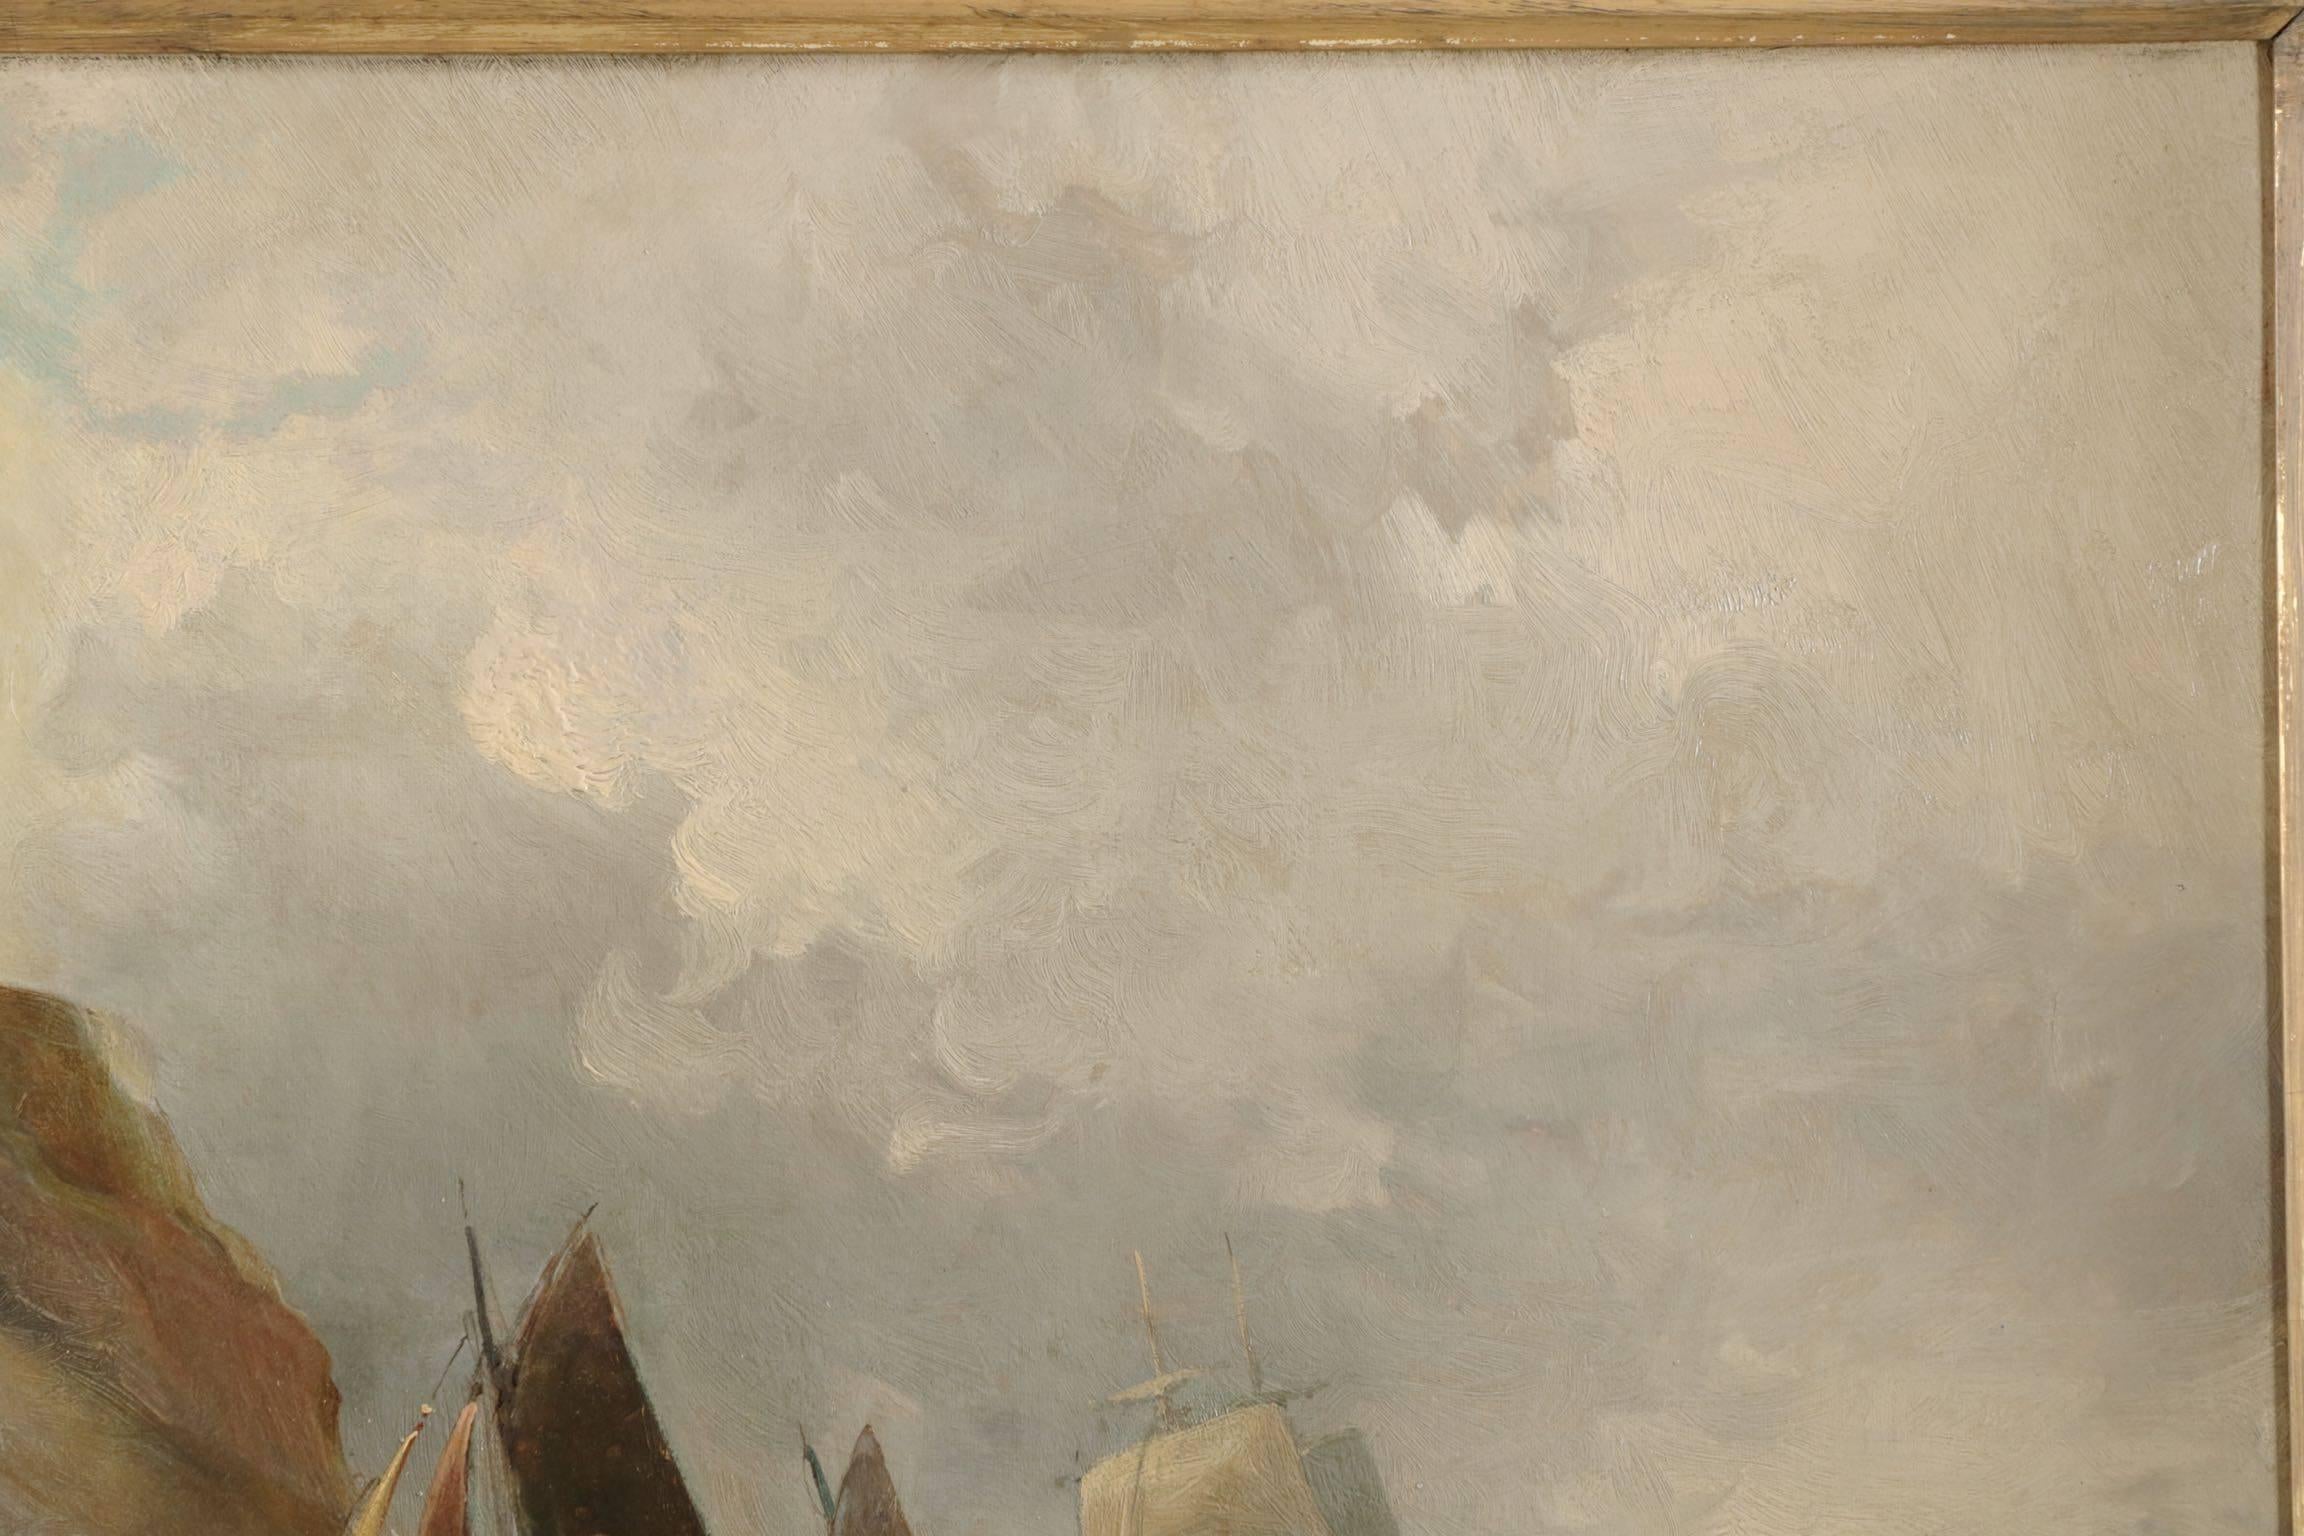 An active piece with such a wealth of detail expressed throughout the canvas, the painting depicts local fishing vessels off the coast fighting through the stormy waters of the harbour under a cloudy sky. The depth of cloud cover suggests an